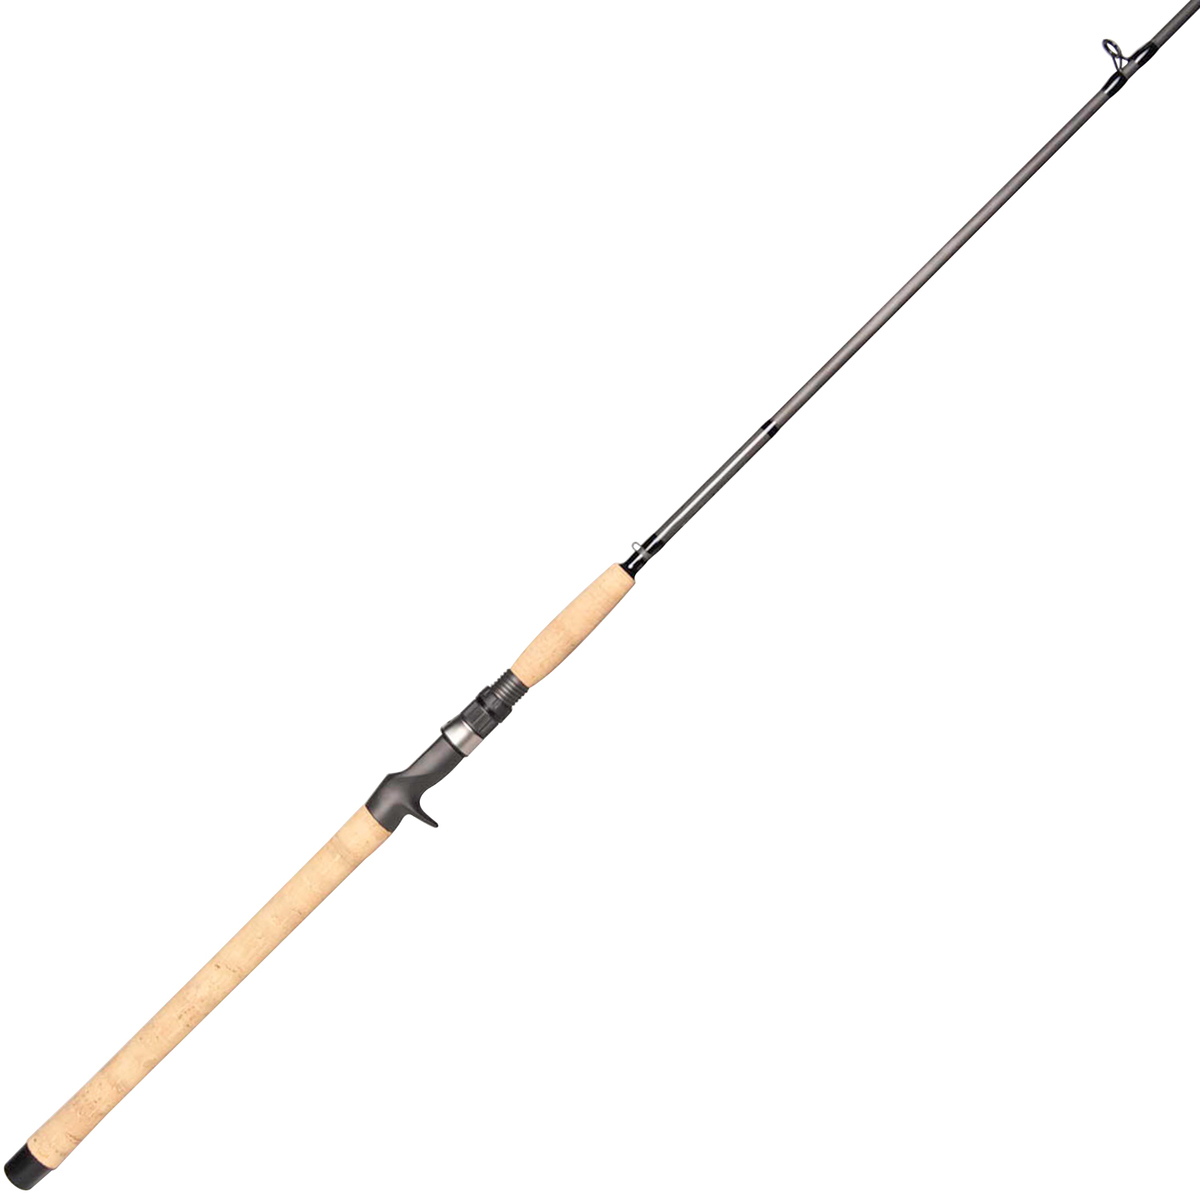 Apache 9800 case for rods & reels. - Fishing Rods, Reels, Line, and  Knots - Bass Fishing Forums